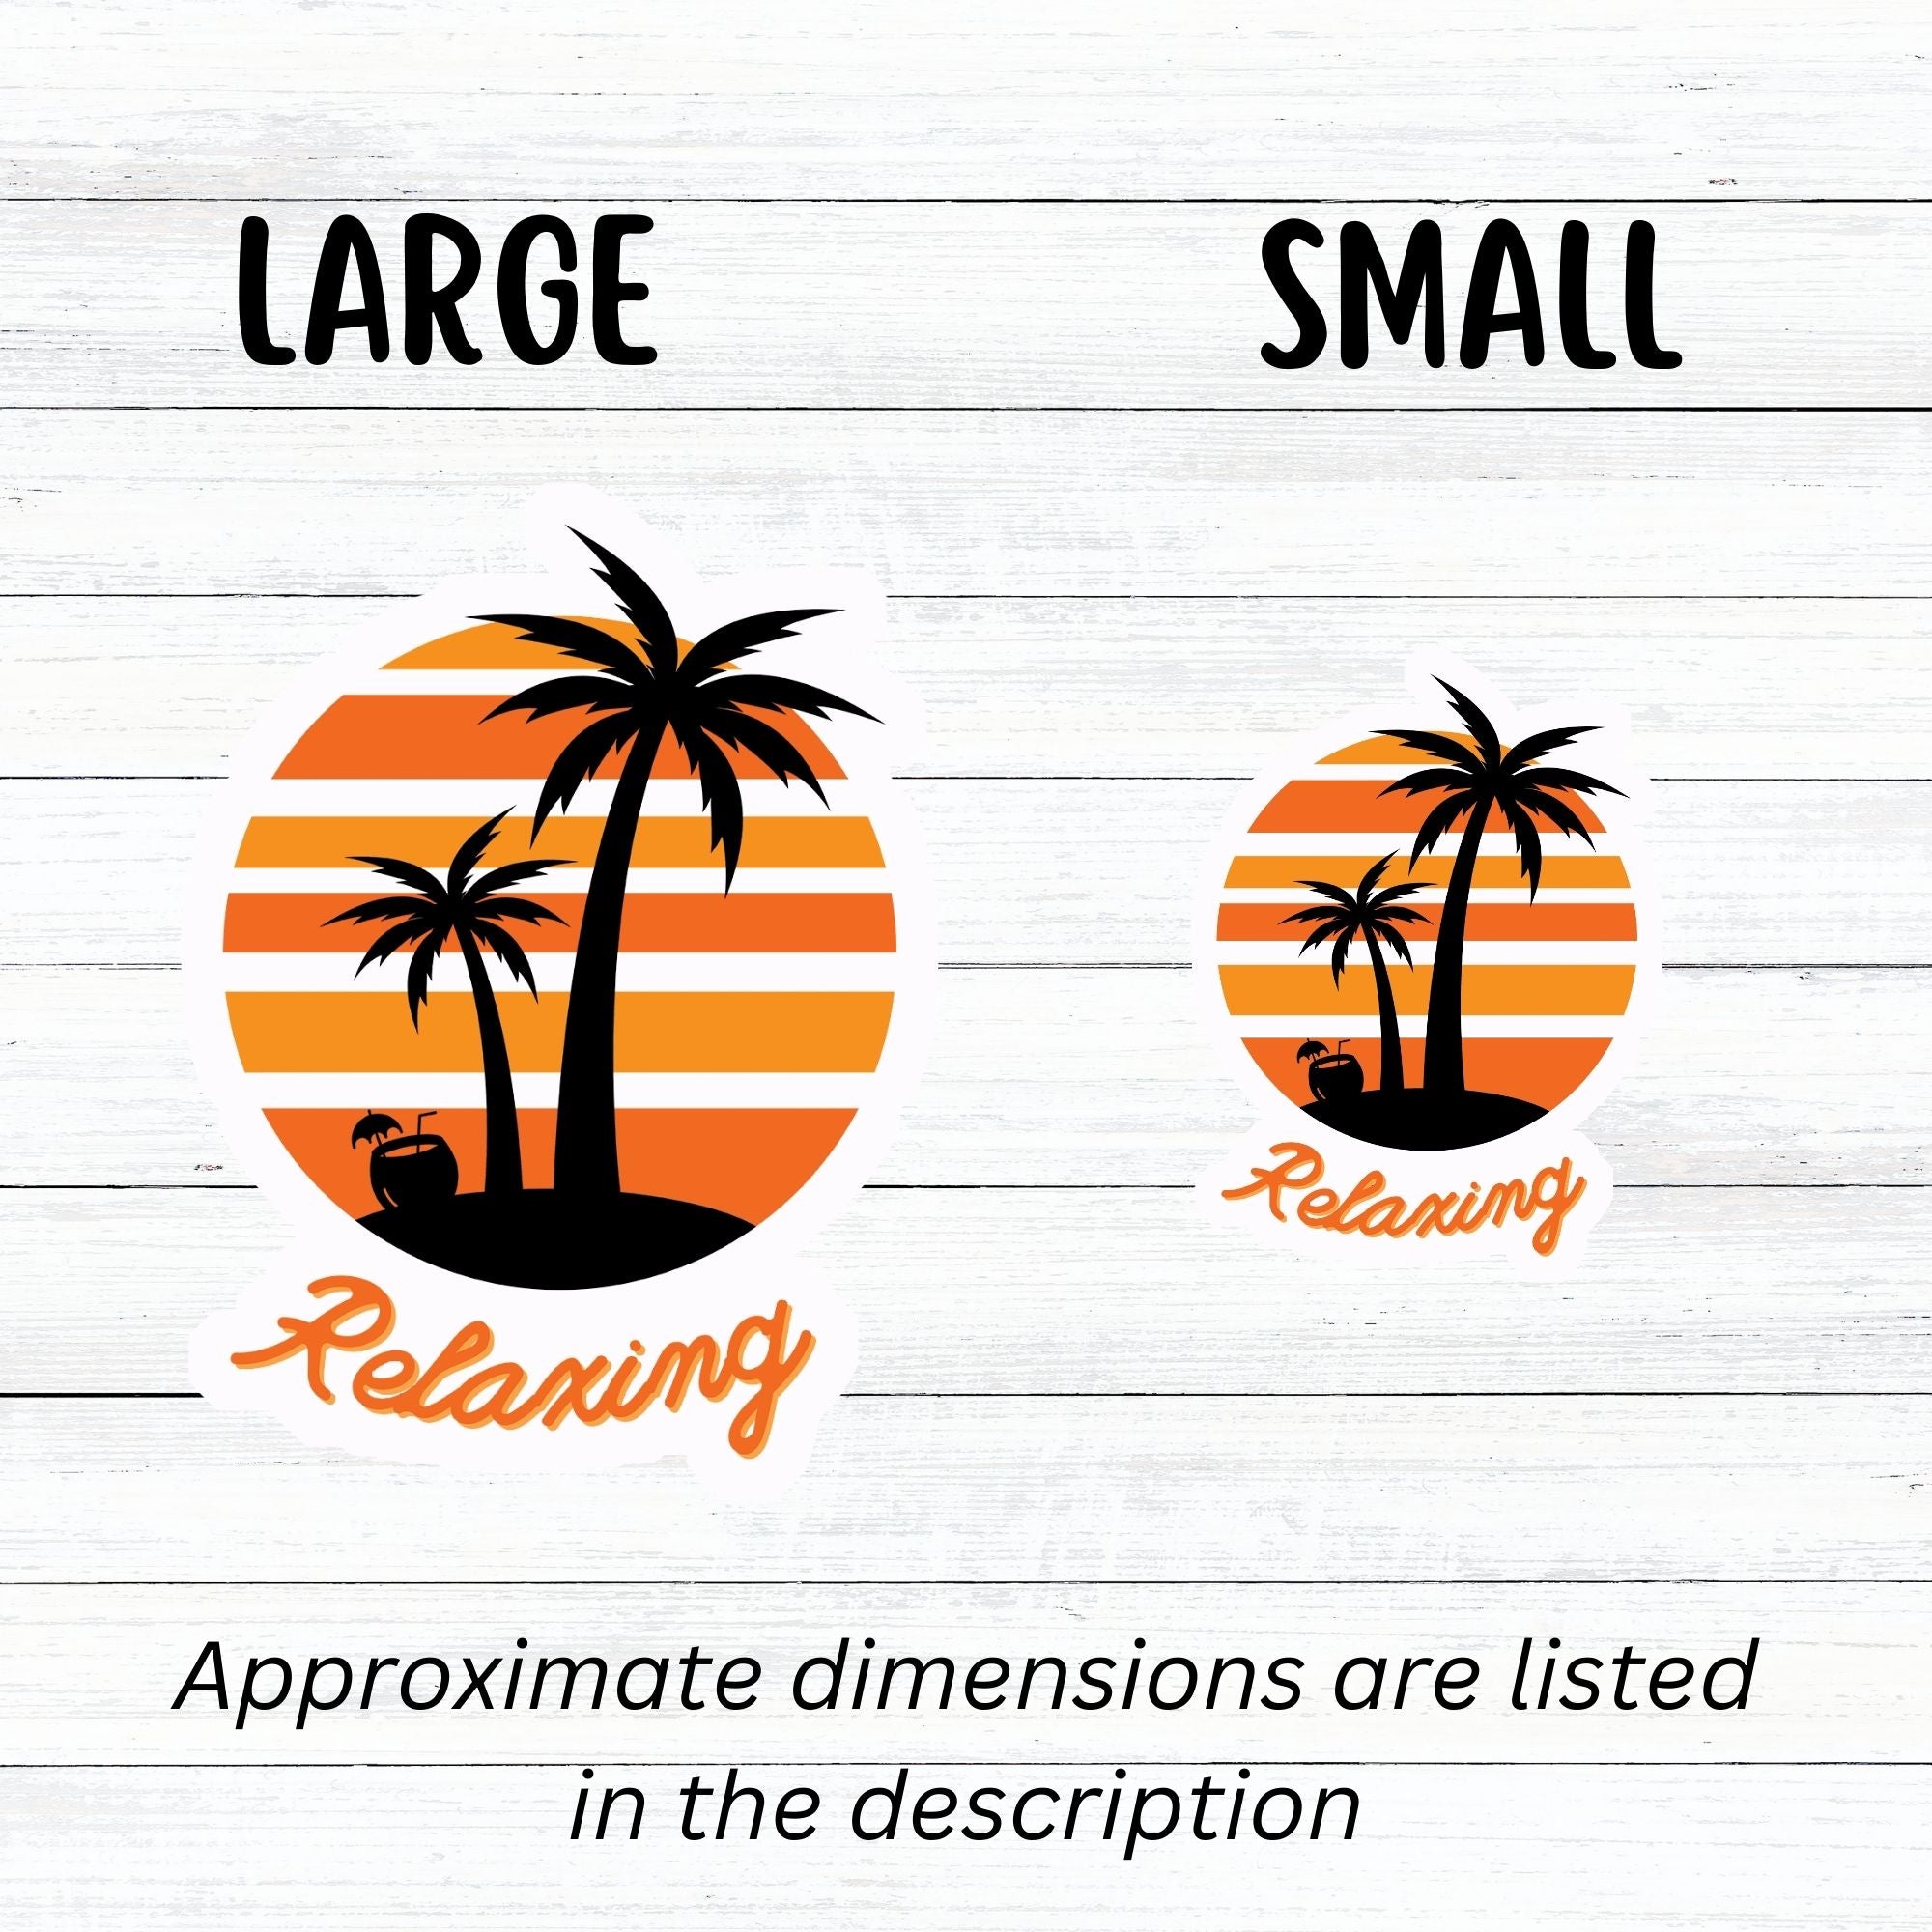 Grab your favorite beverage and relax under the palm trees! This individual die-cut sticker features two palm trees and an umbrella drink in a coconut shell, on an orange and white gradient background, with the word "Relaxing" below. This image shows the large and small relaxing stickers next to each other.